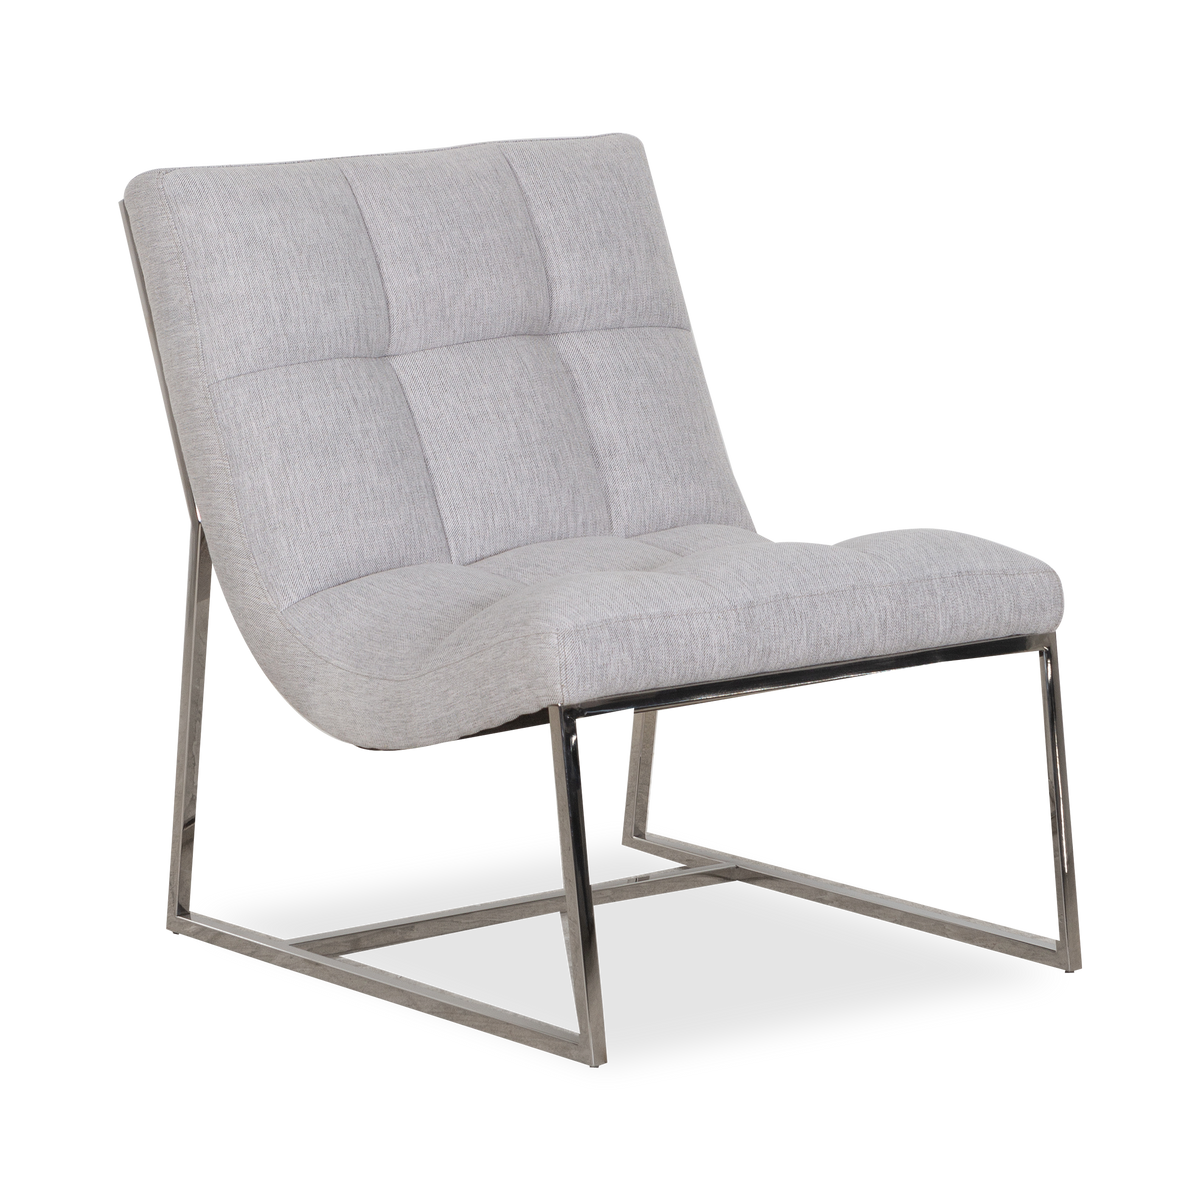 With its perfectly stuffed, fabric wrapped cushioning and sleek metal base, the Scoop Armless Chair offers a tailored look and comfortable feel.